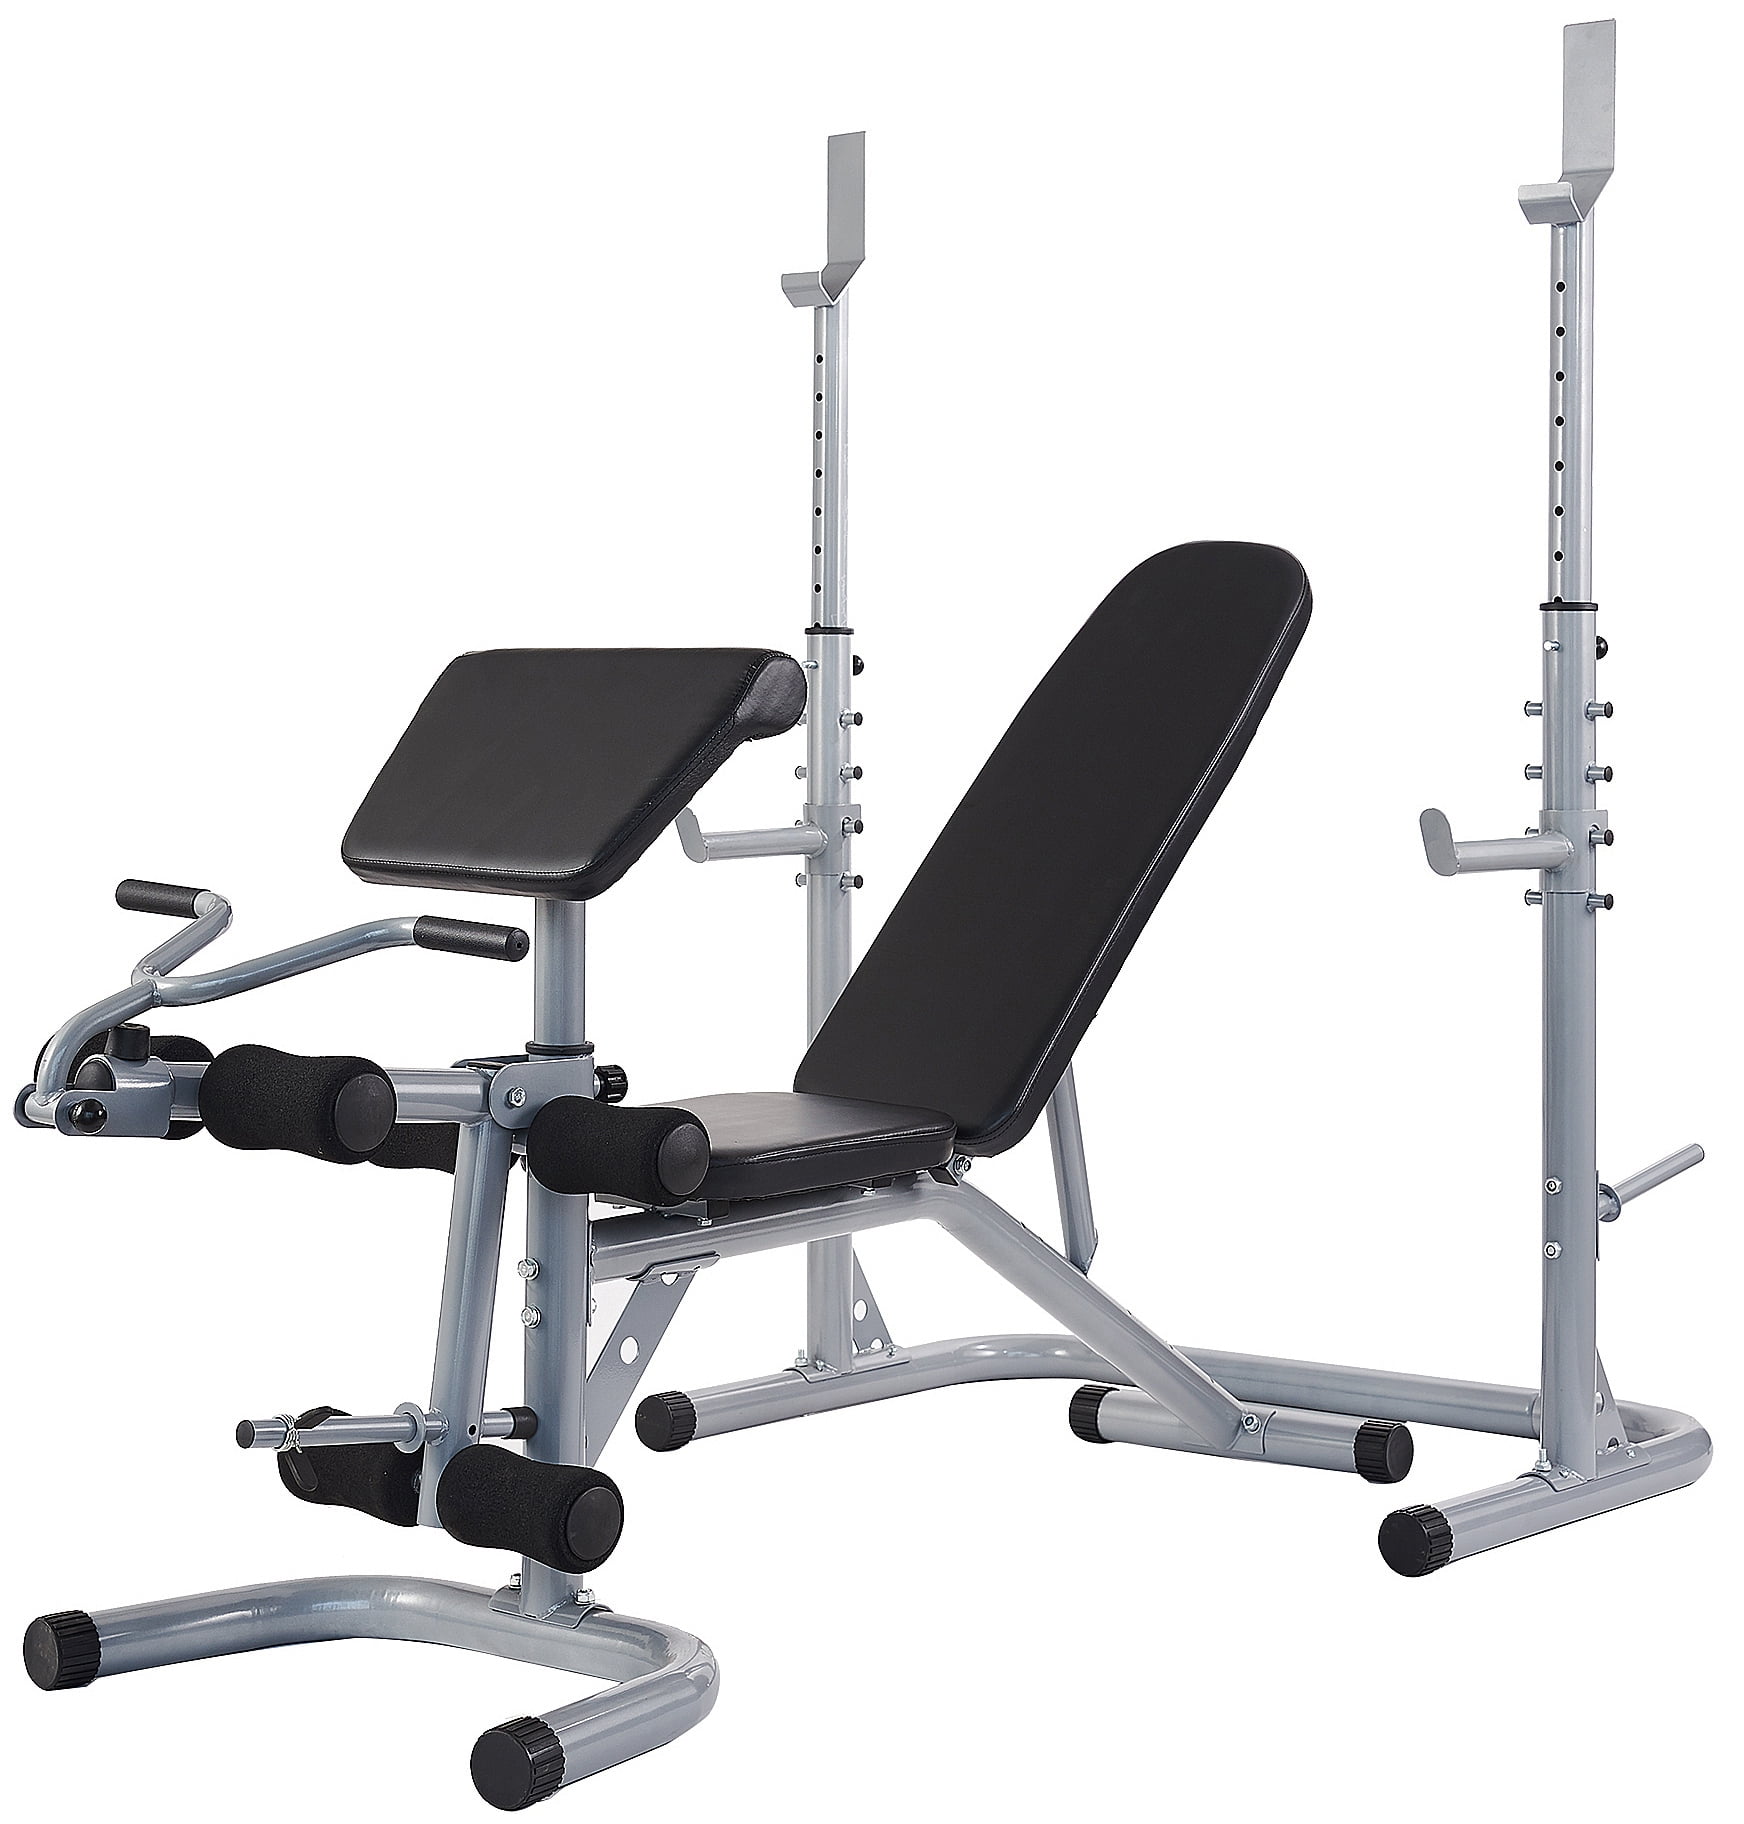 Workout Bench With Squat Rack